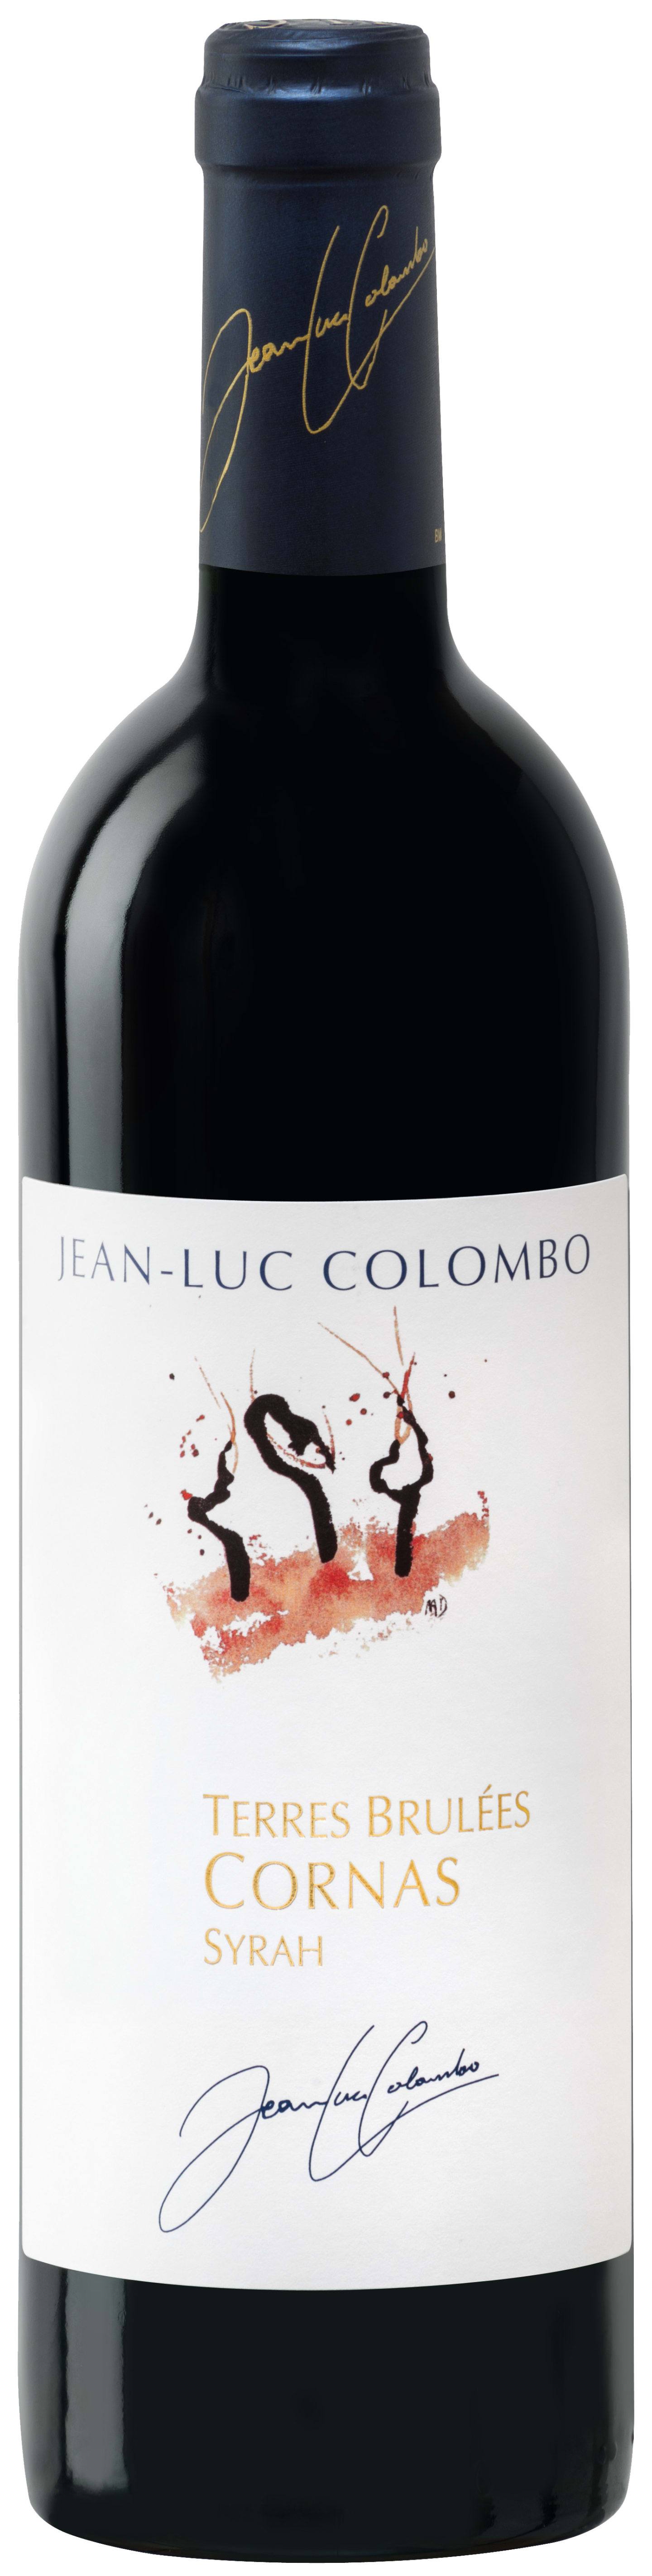 Jean-Luc Colombo Cornas Les Terres Brulees 2014